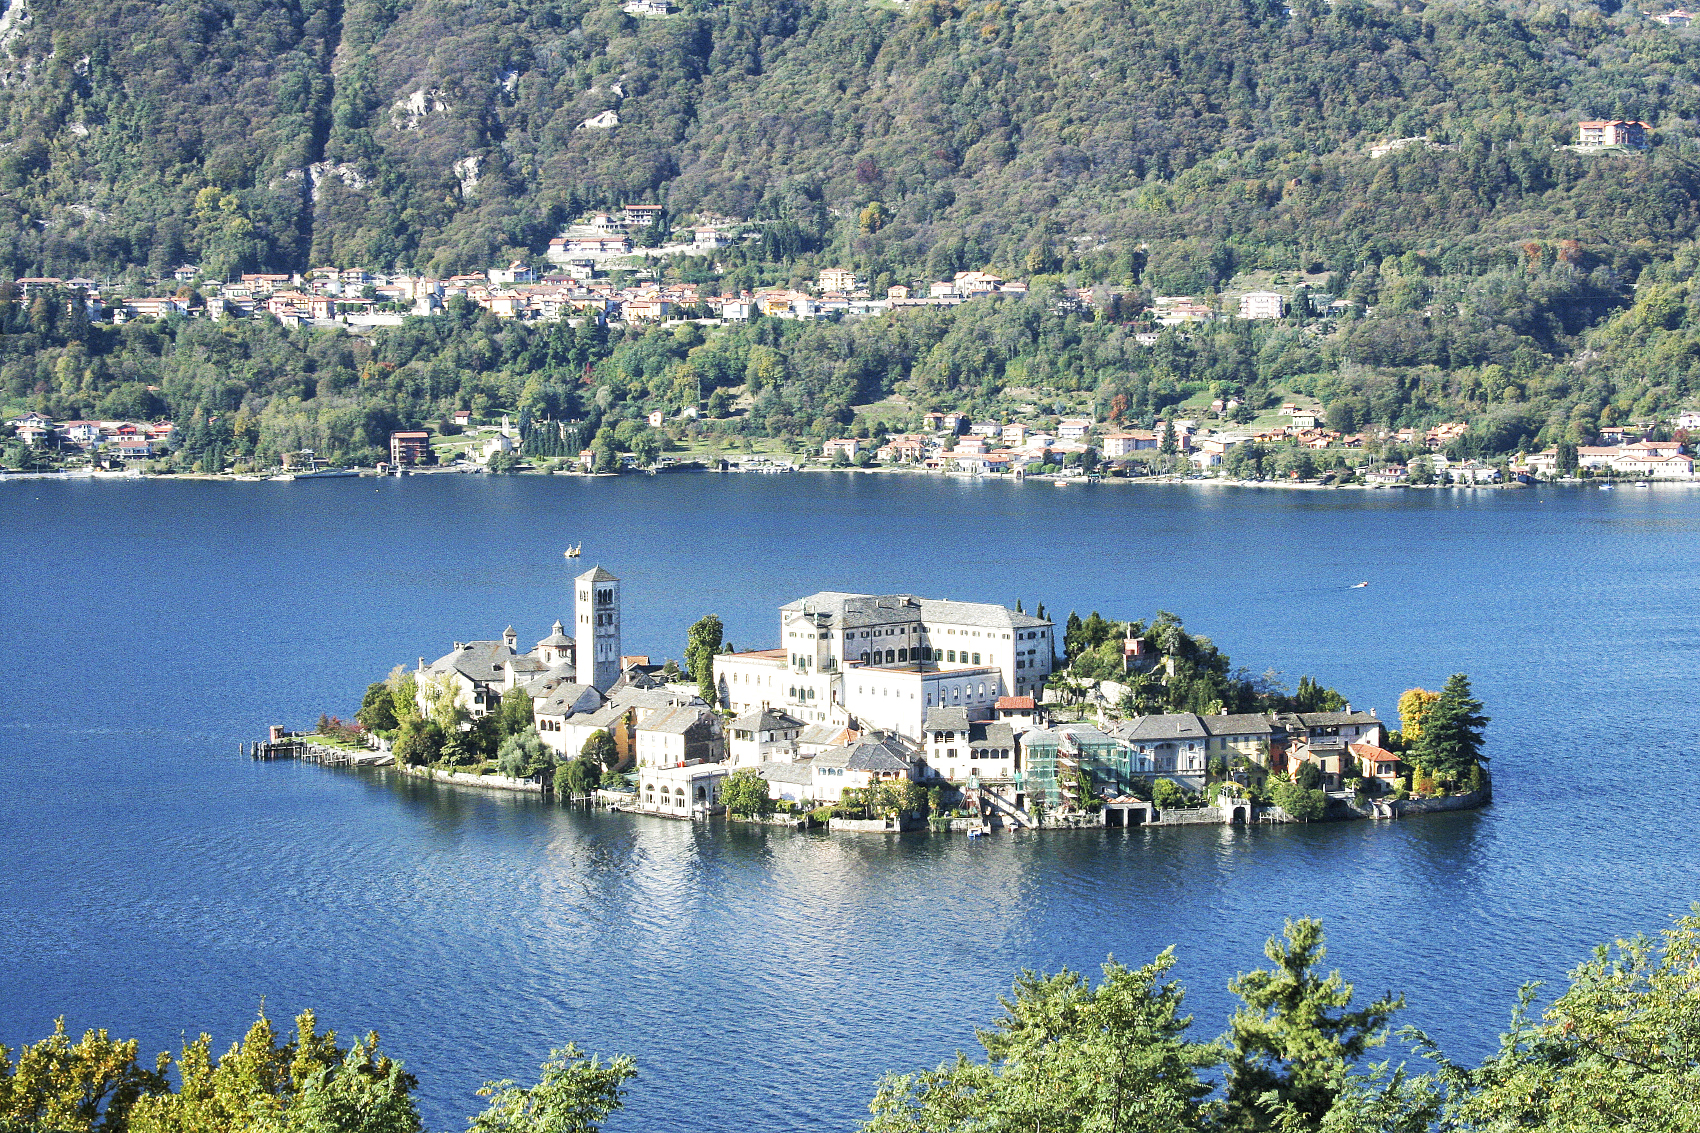 The island of San Giulio and its history...